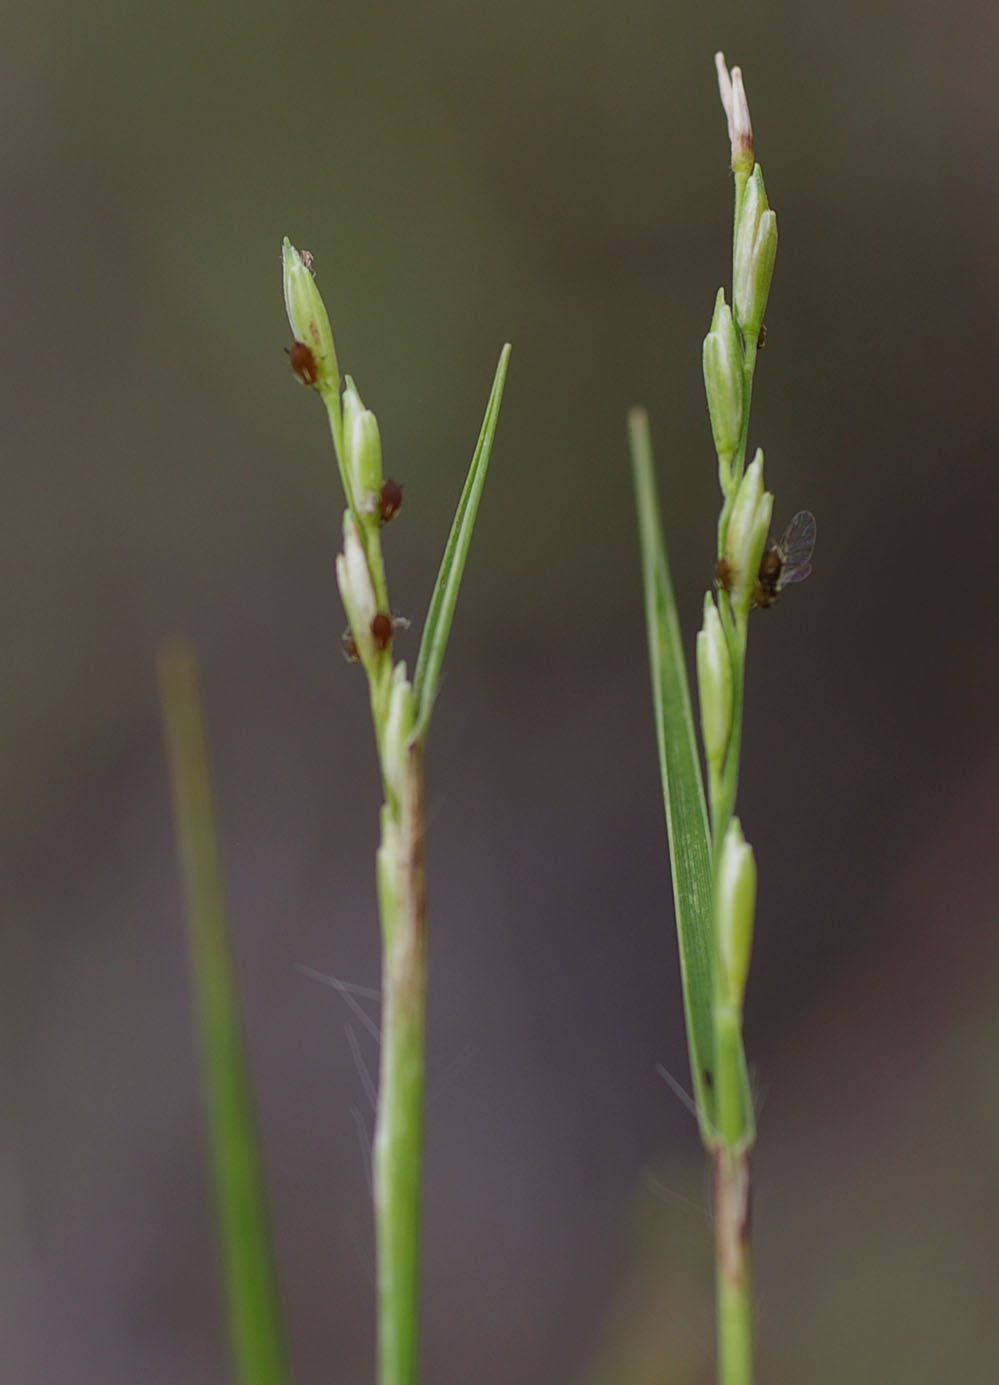 Fig. 3. Image showing open (chasmogamous) spikelets on terminal raceme of Cleistochloa subjuncea (PHOTO: RJ Cummings d8687a).